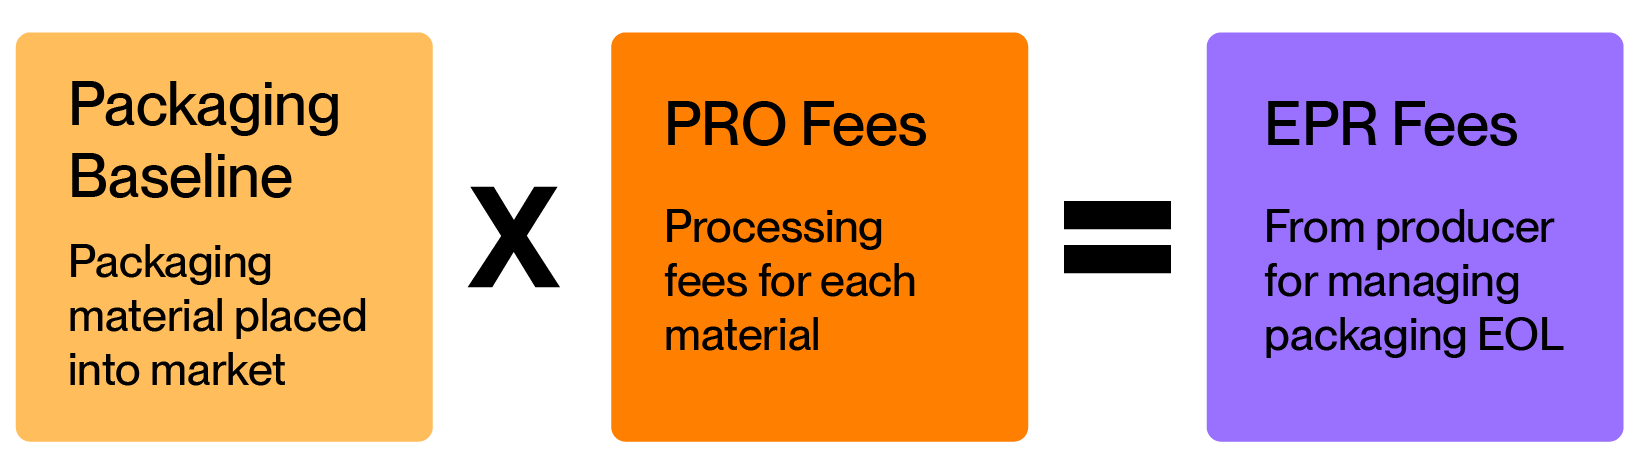 packaging baseline times PRO fees equals EPR fees